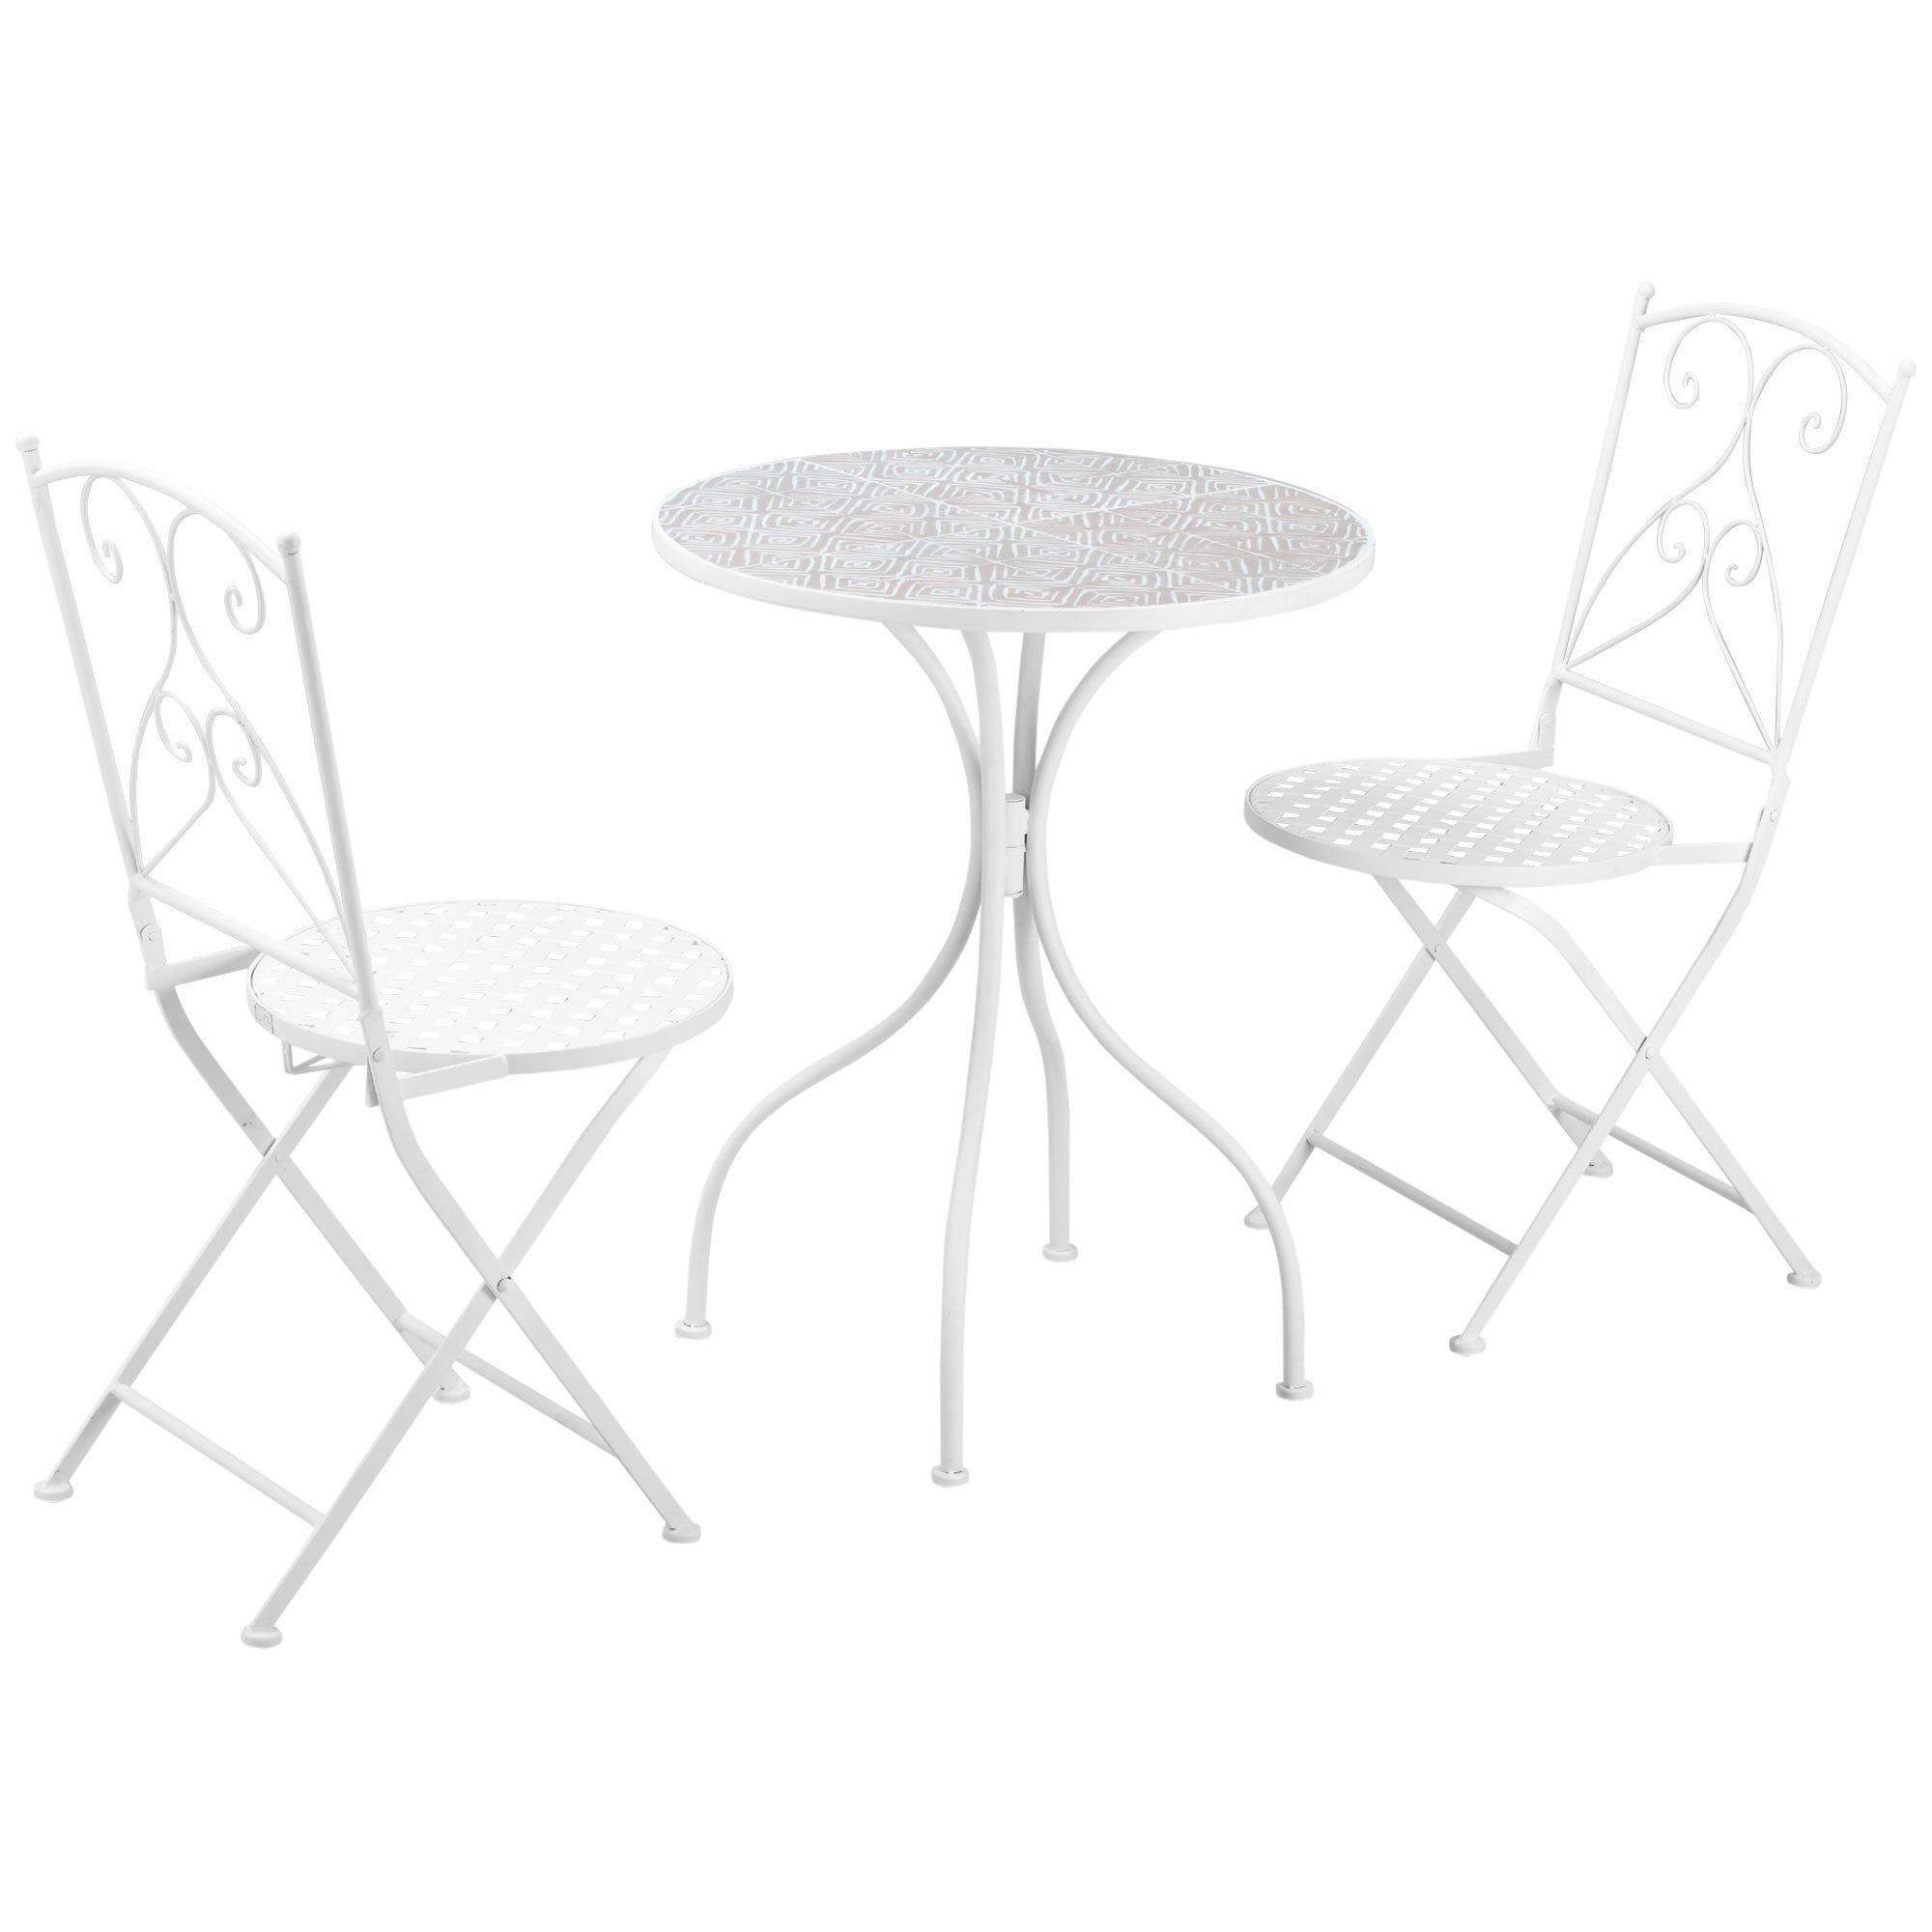 3 Piece Garden Bistro Set with Mosaic Top for Patio Balcony Poolside - image 1